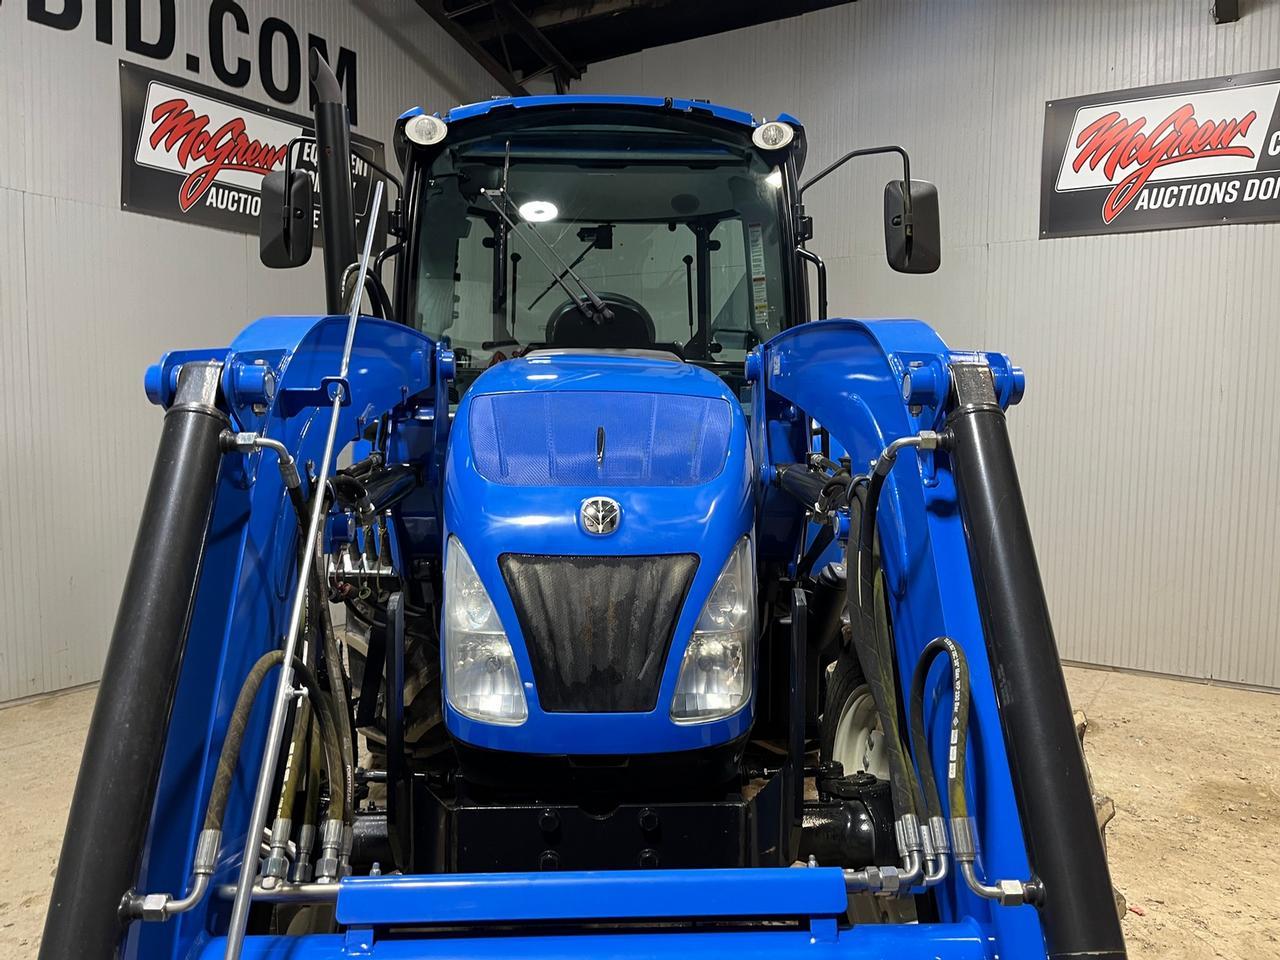 2016 New Holland T4.75 Tractor